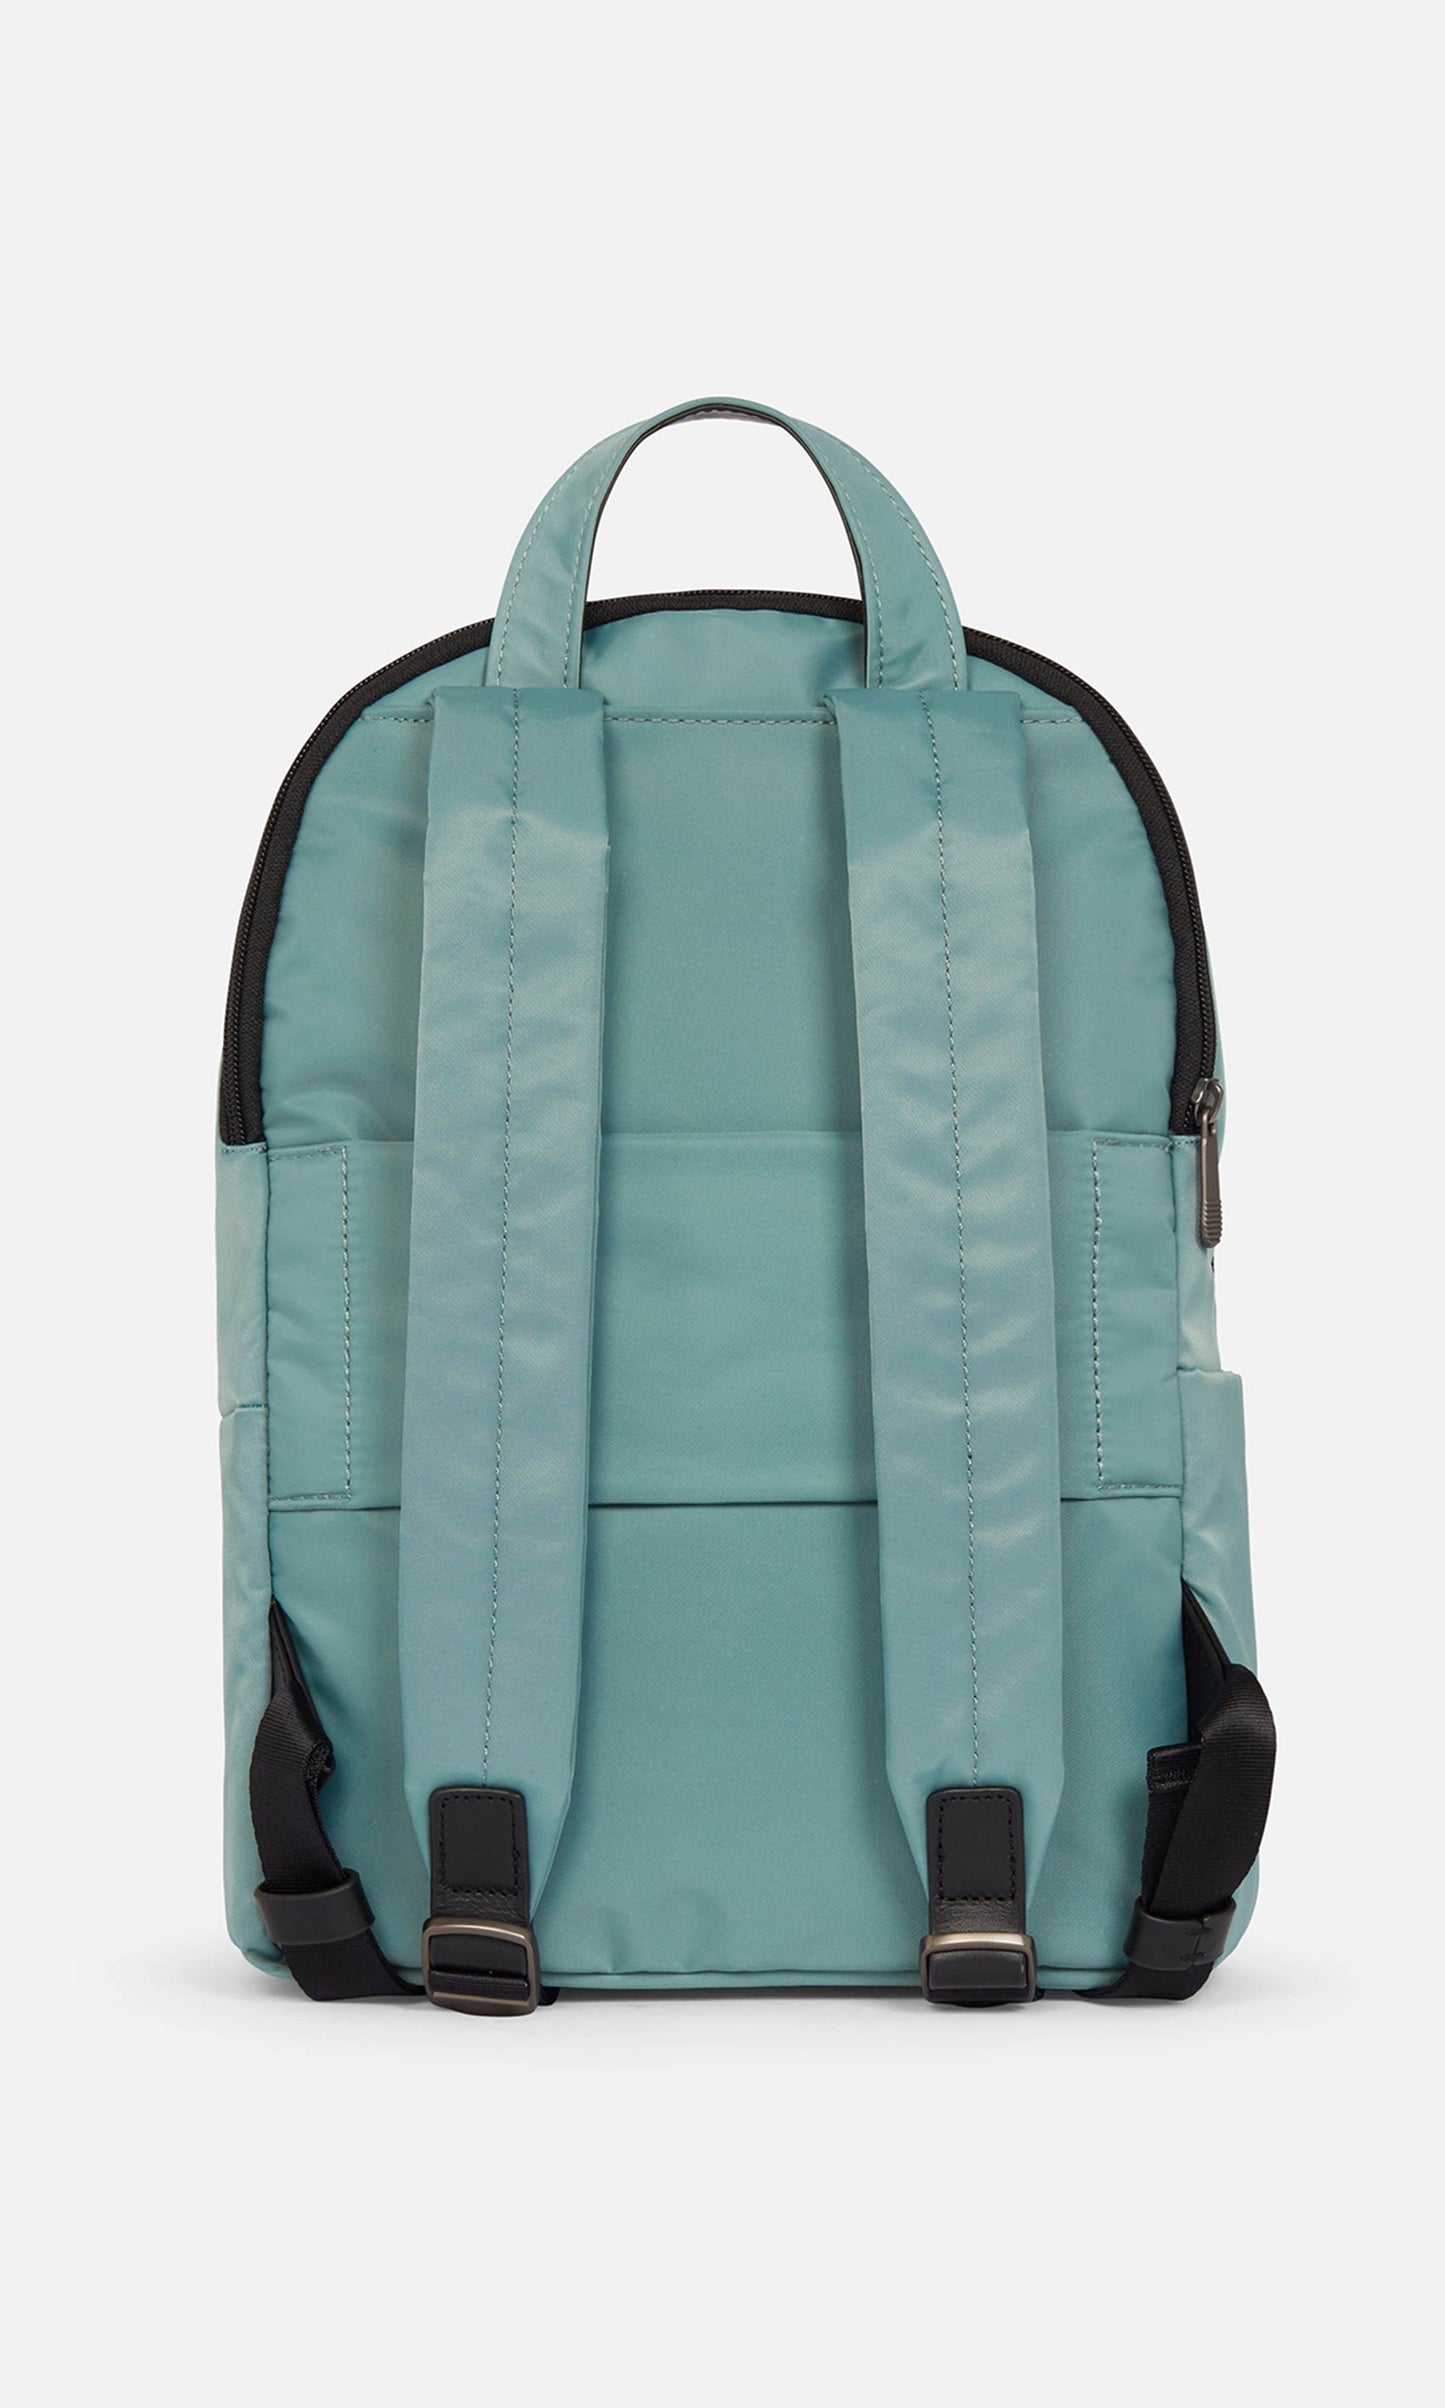 Chelsea Daypack in Mineral